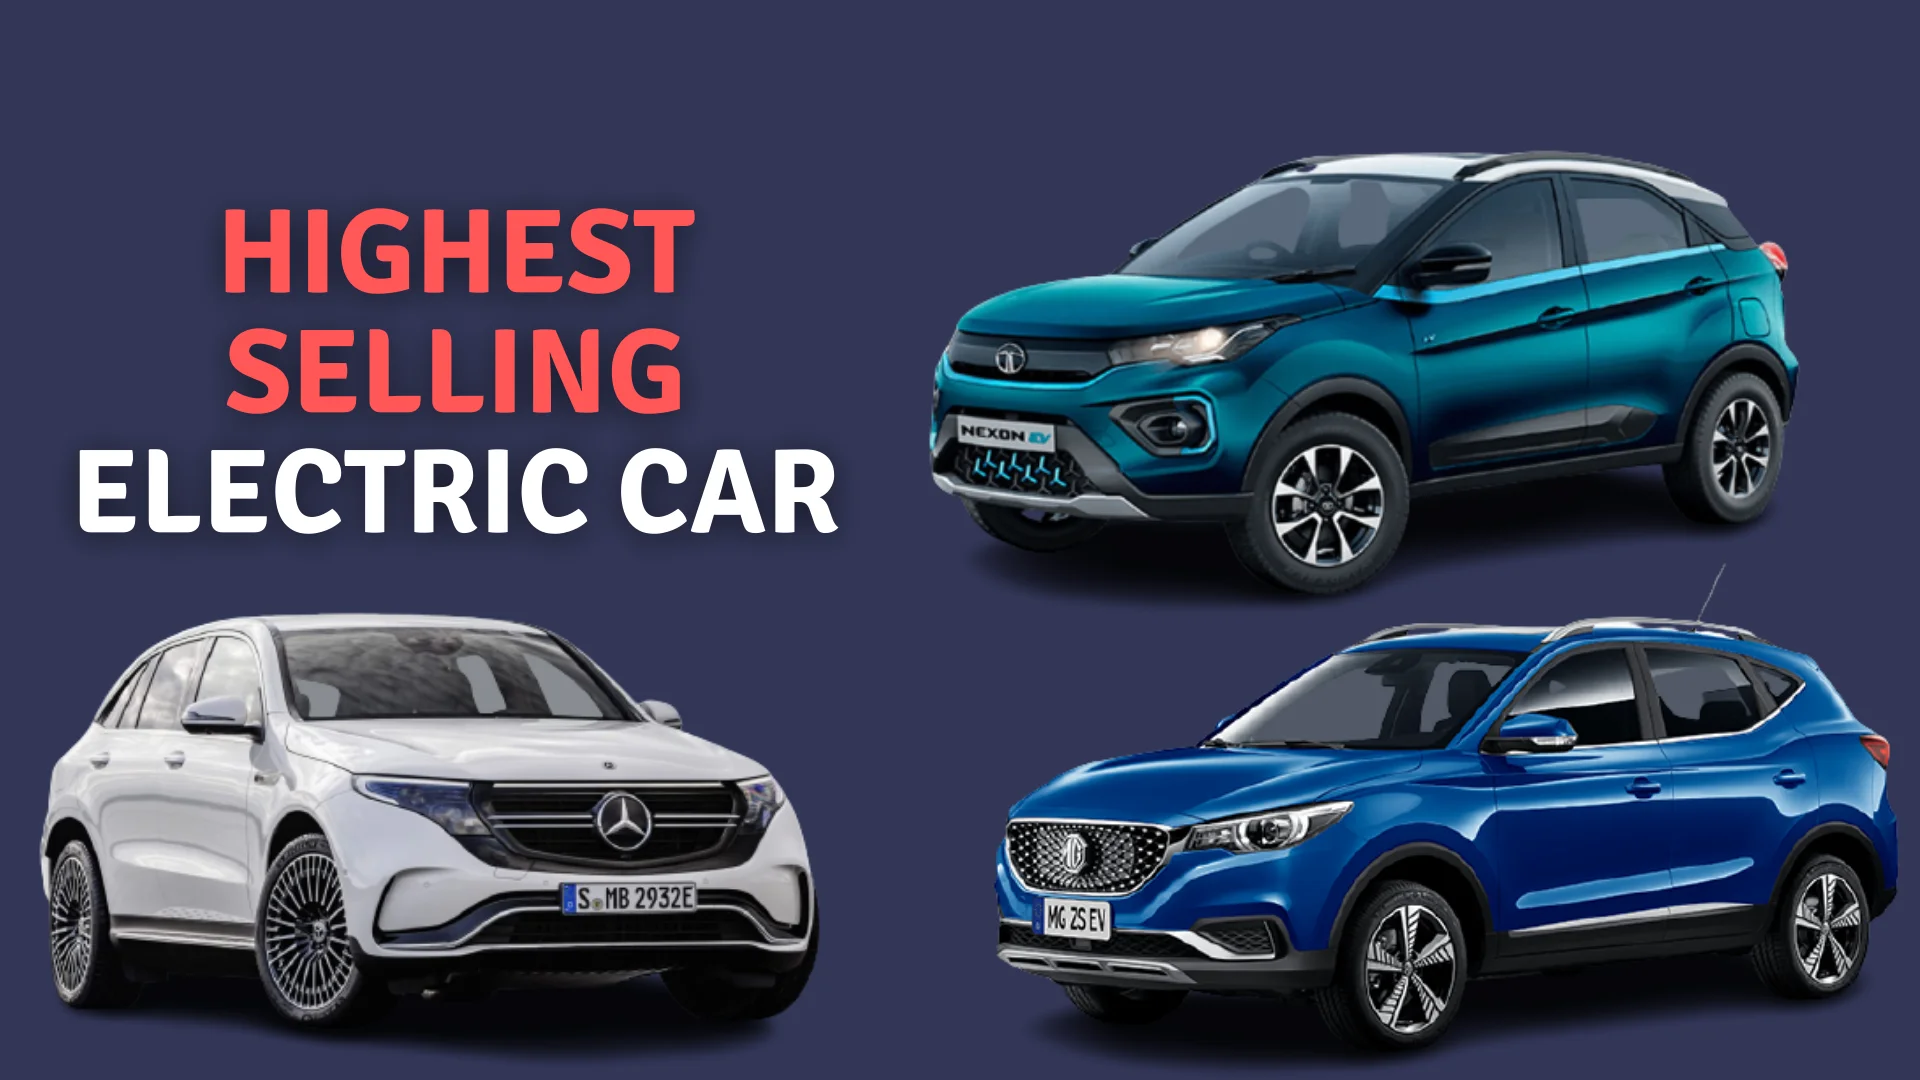 https://e-vehicleinfo.com/highest-selling-electric-car-with-their-price/